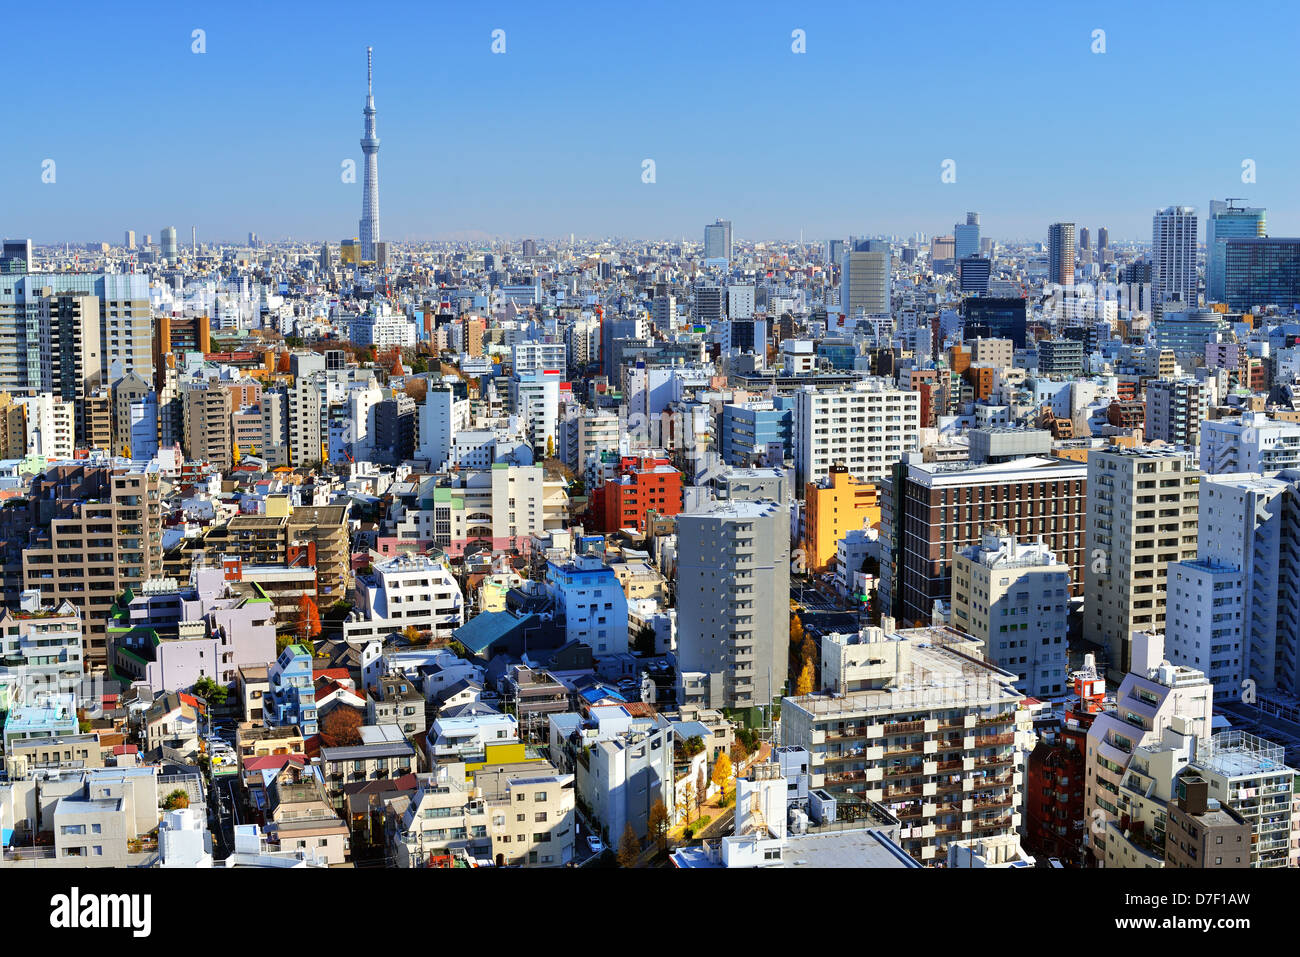 Urban cityscape of Tokyo with the Tokyo Skytree in the distance. Stock Photo